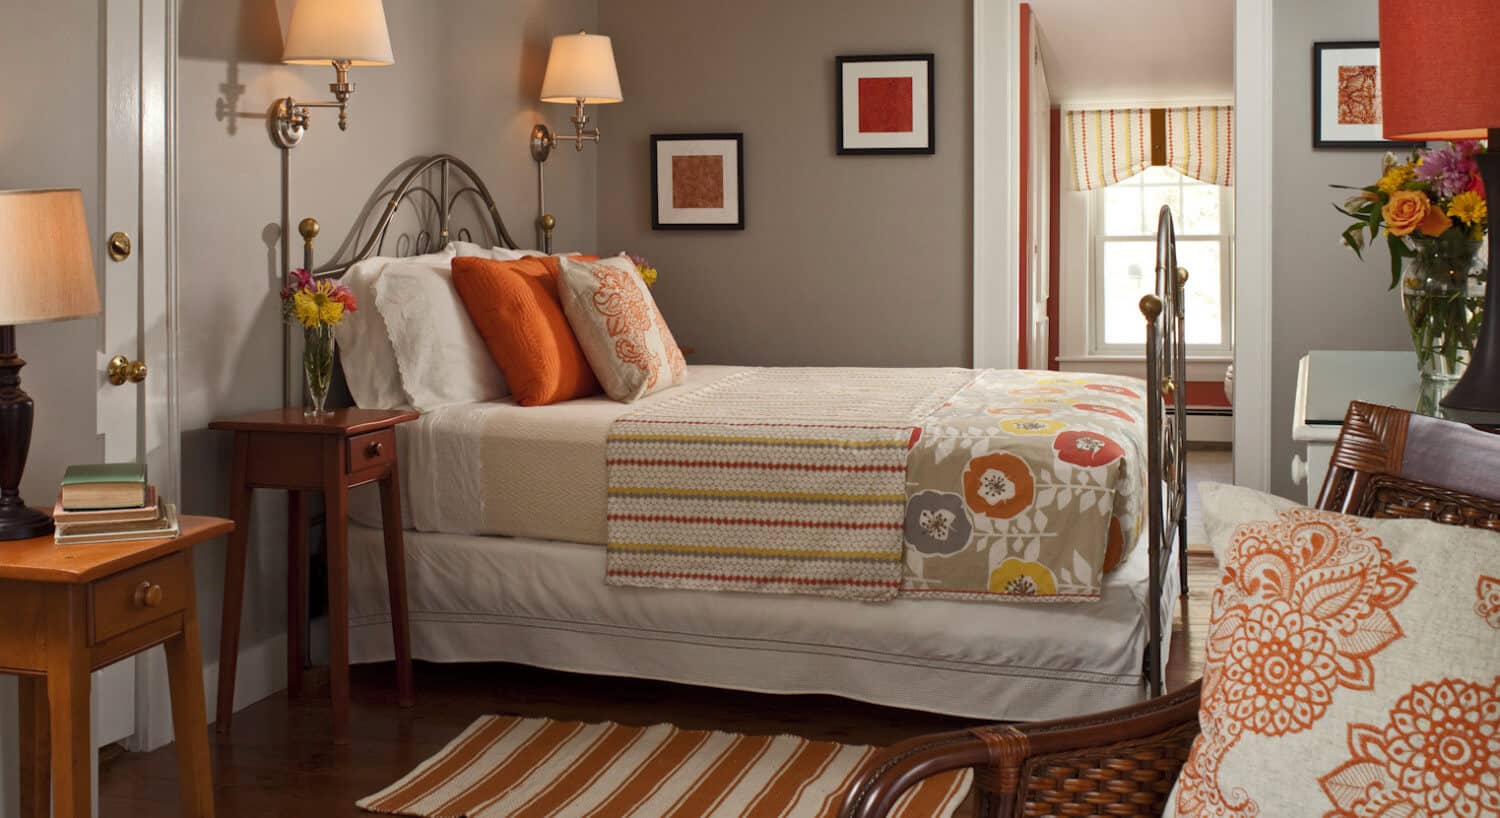 Clean and fresh bedroom decorated in grey and orange with a large brass bed and comfortable seating. 